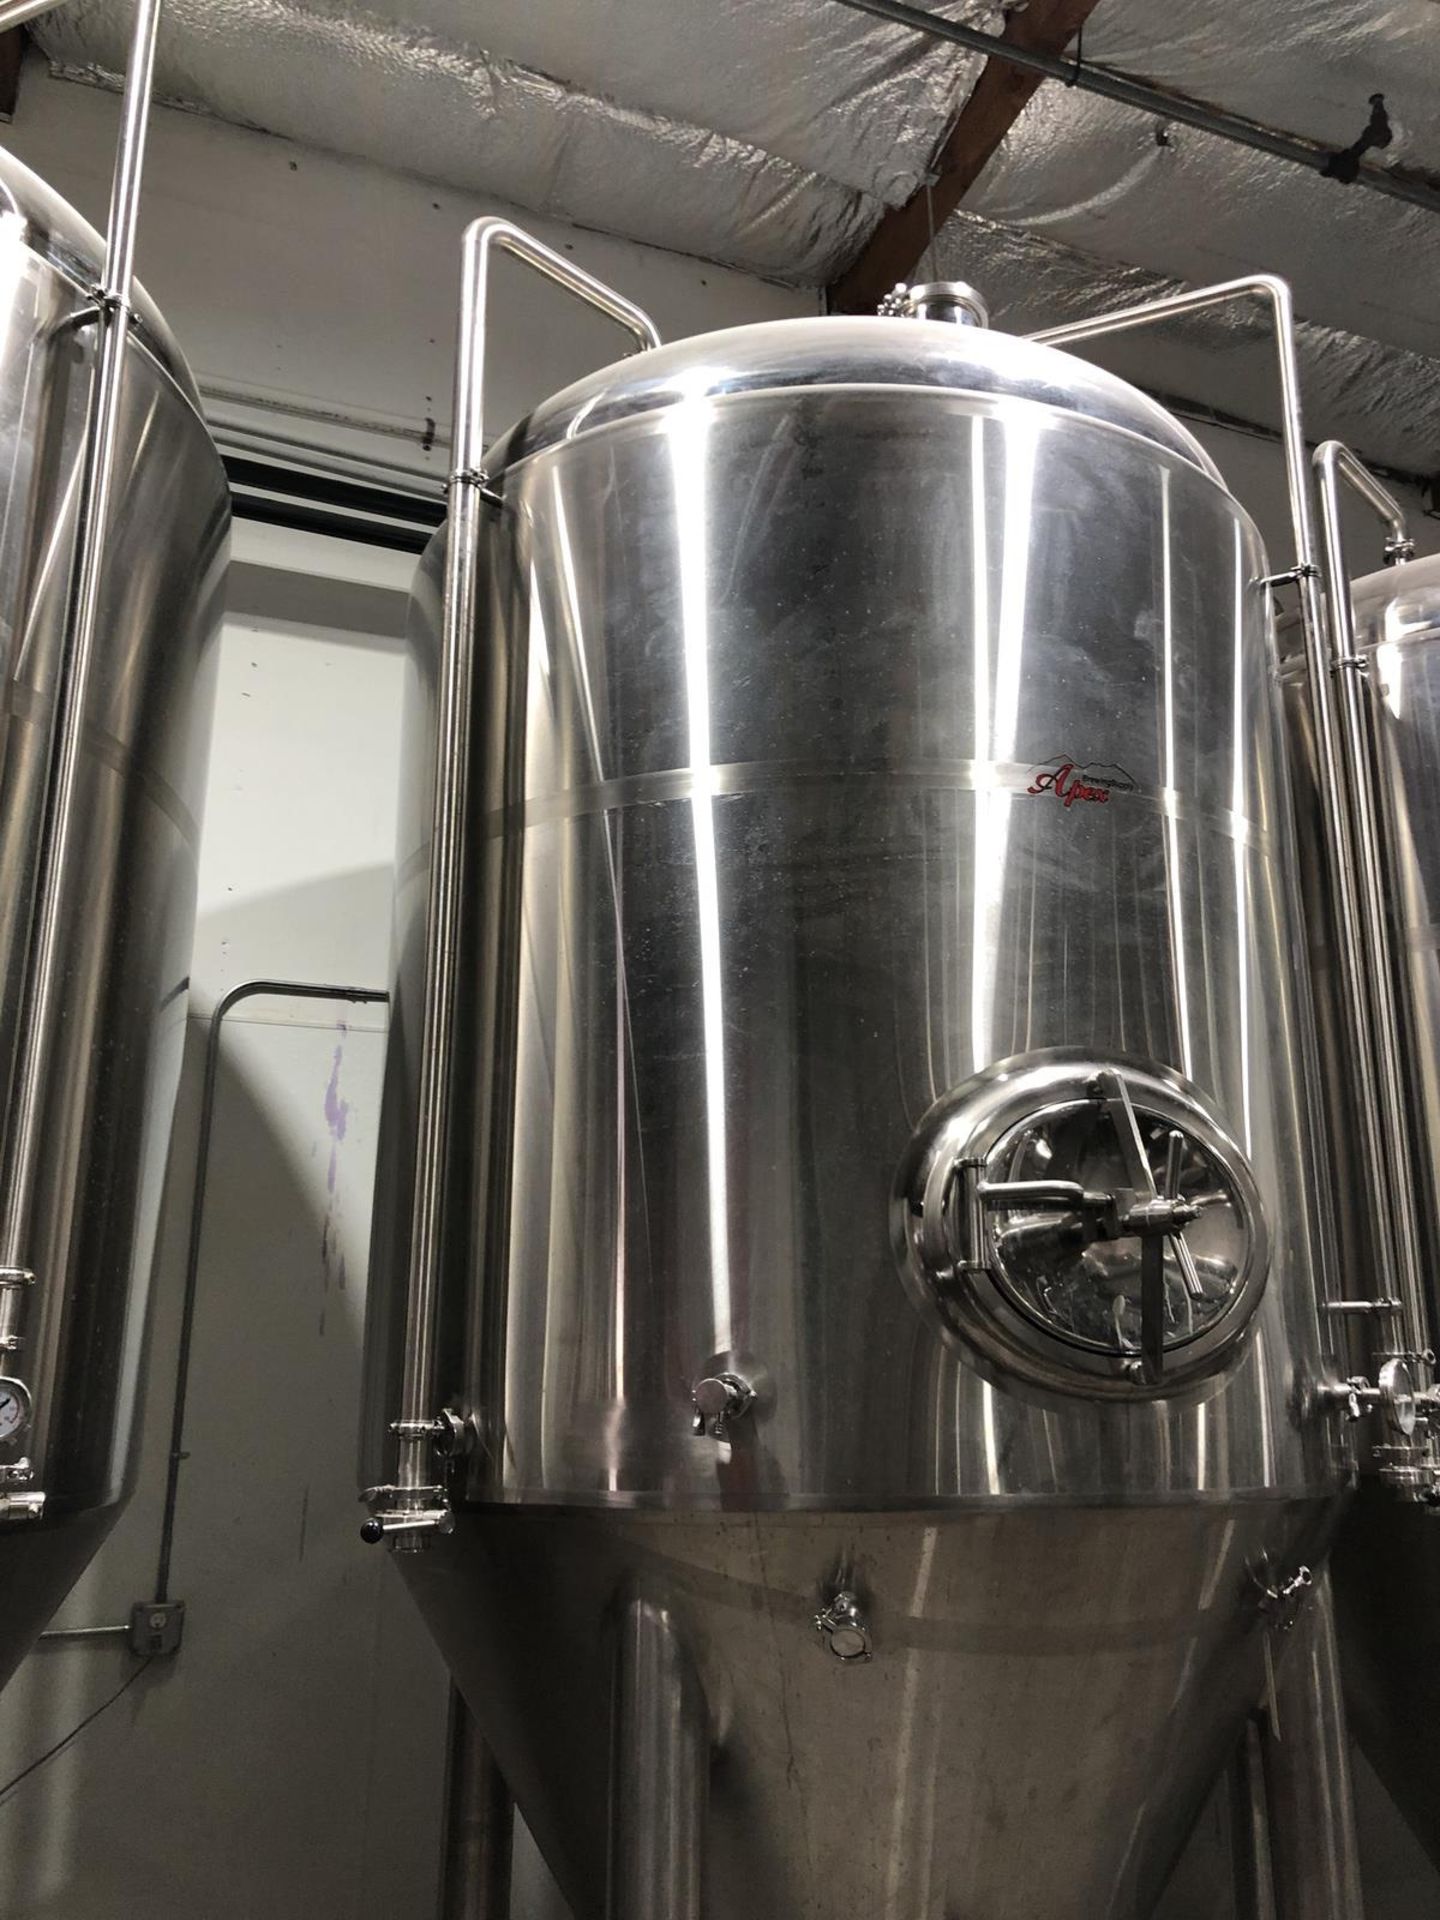 2017 Apex Brewing 30 BBL Unitank Fermenter, Glycol Jacketed, Approx - Subj to Bulk | Rig Fee: $800 - Image 5 of 8